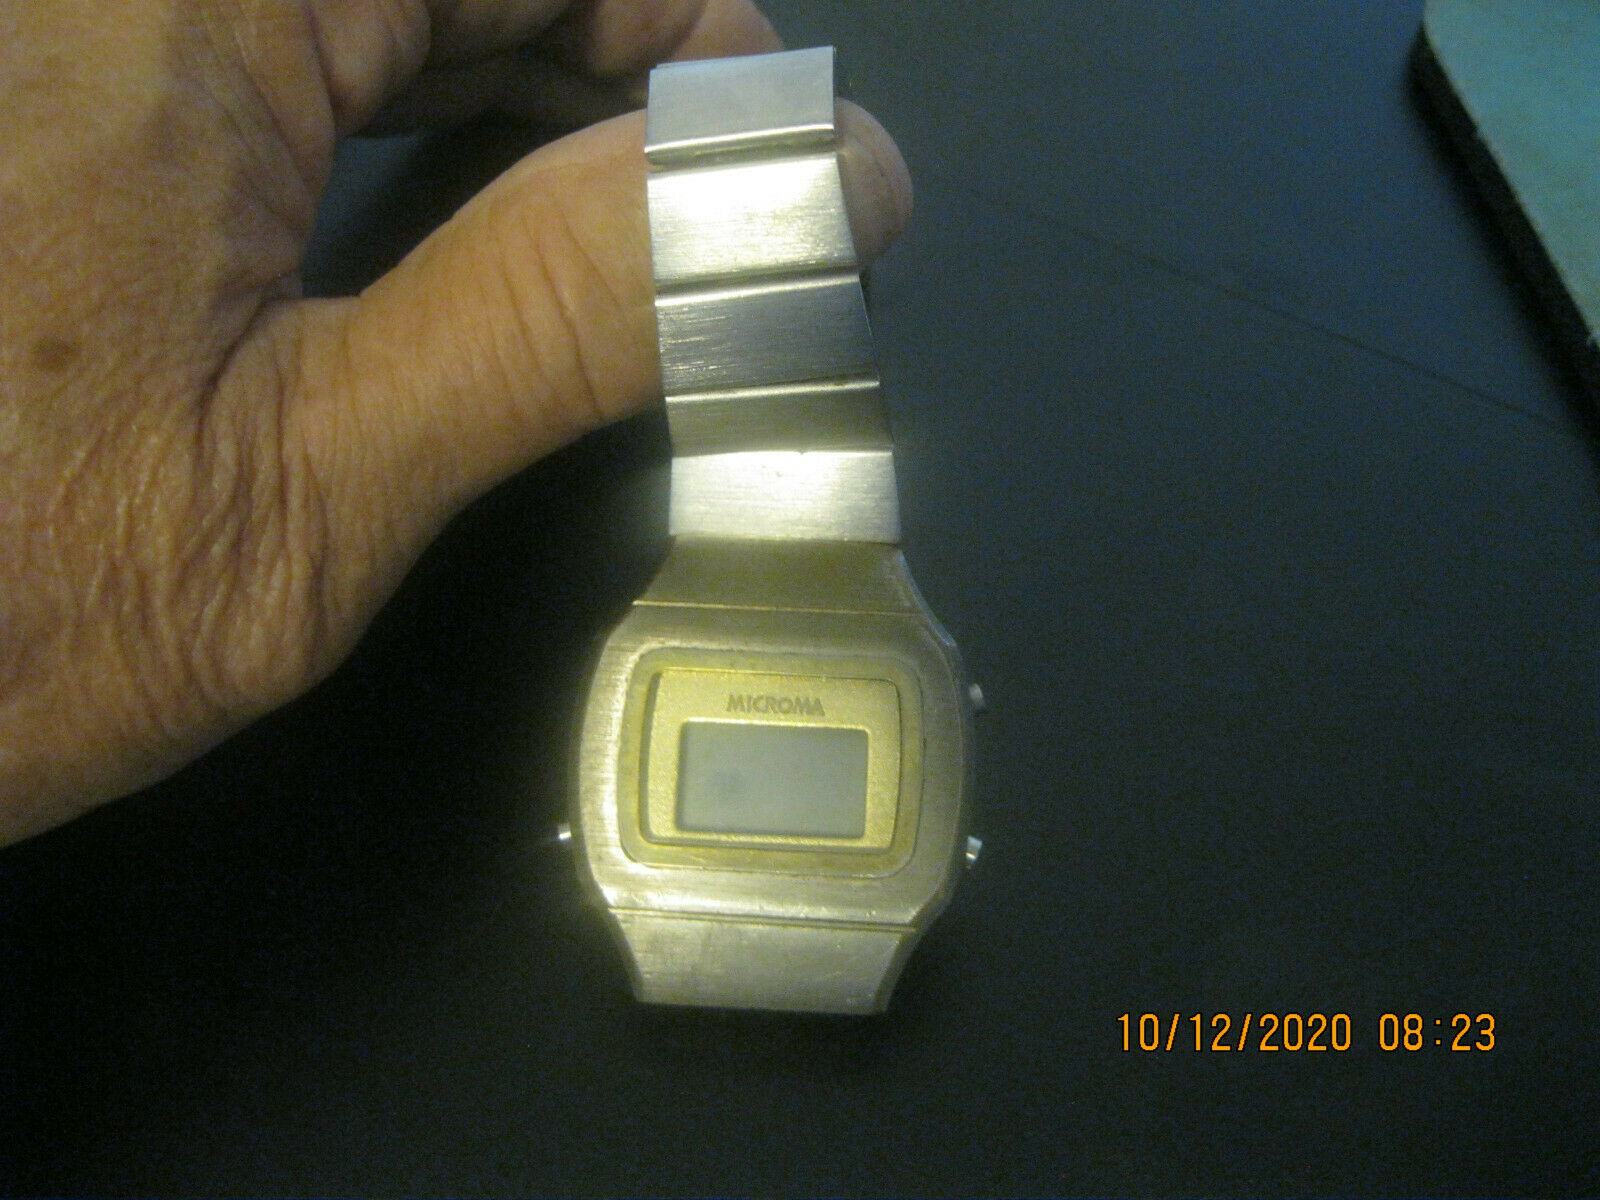 Gordon Moore's $15 Million Watch - The Story of Intel and Microma - Grail  Watch